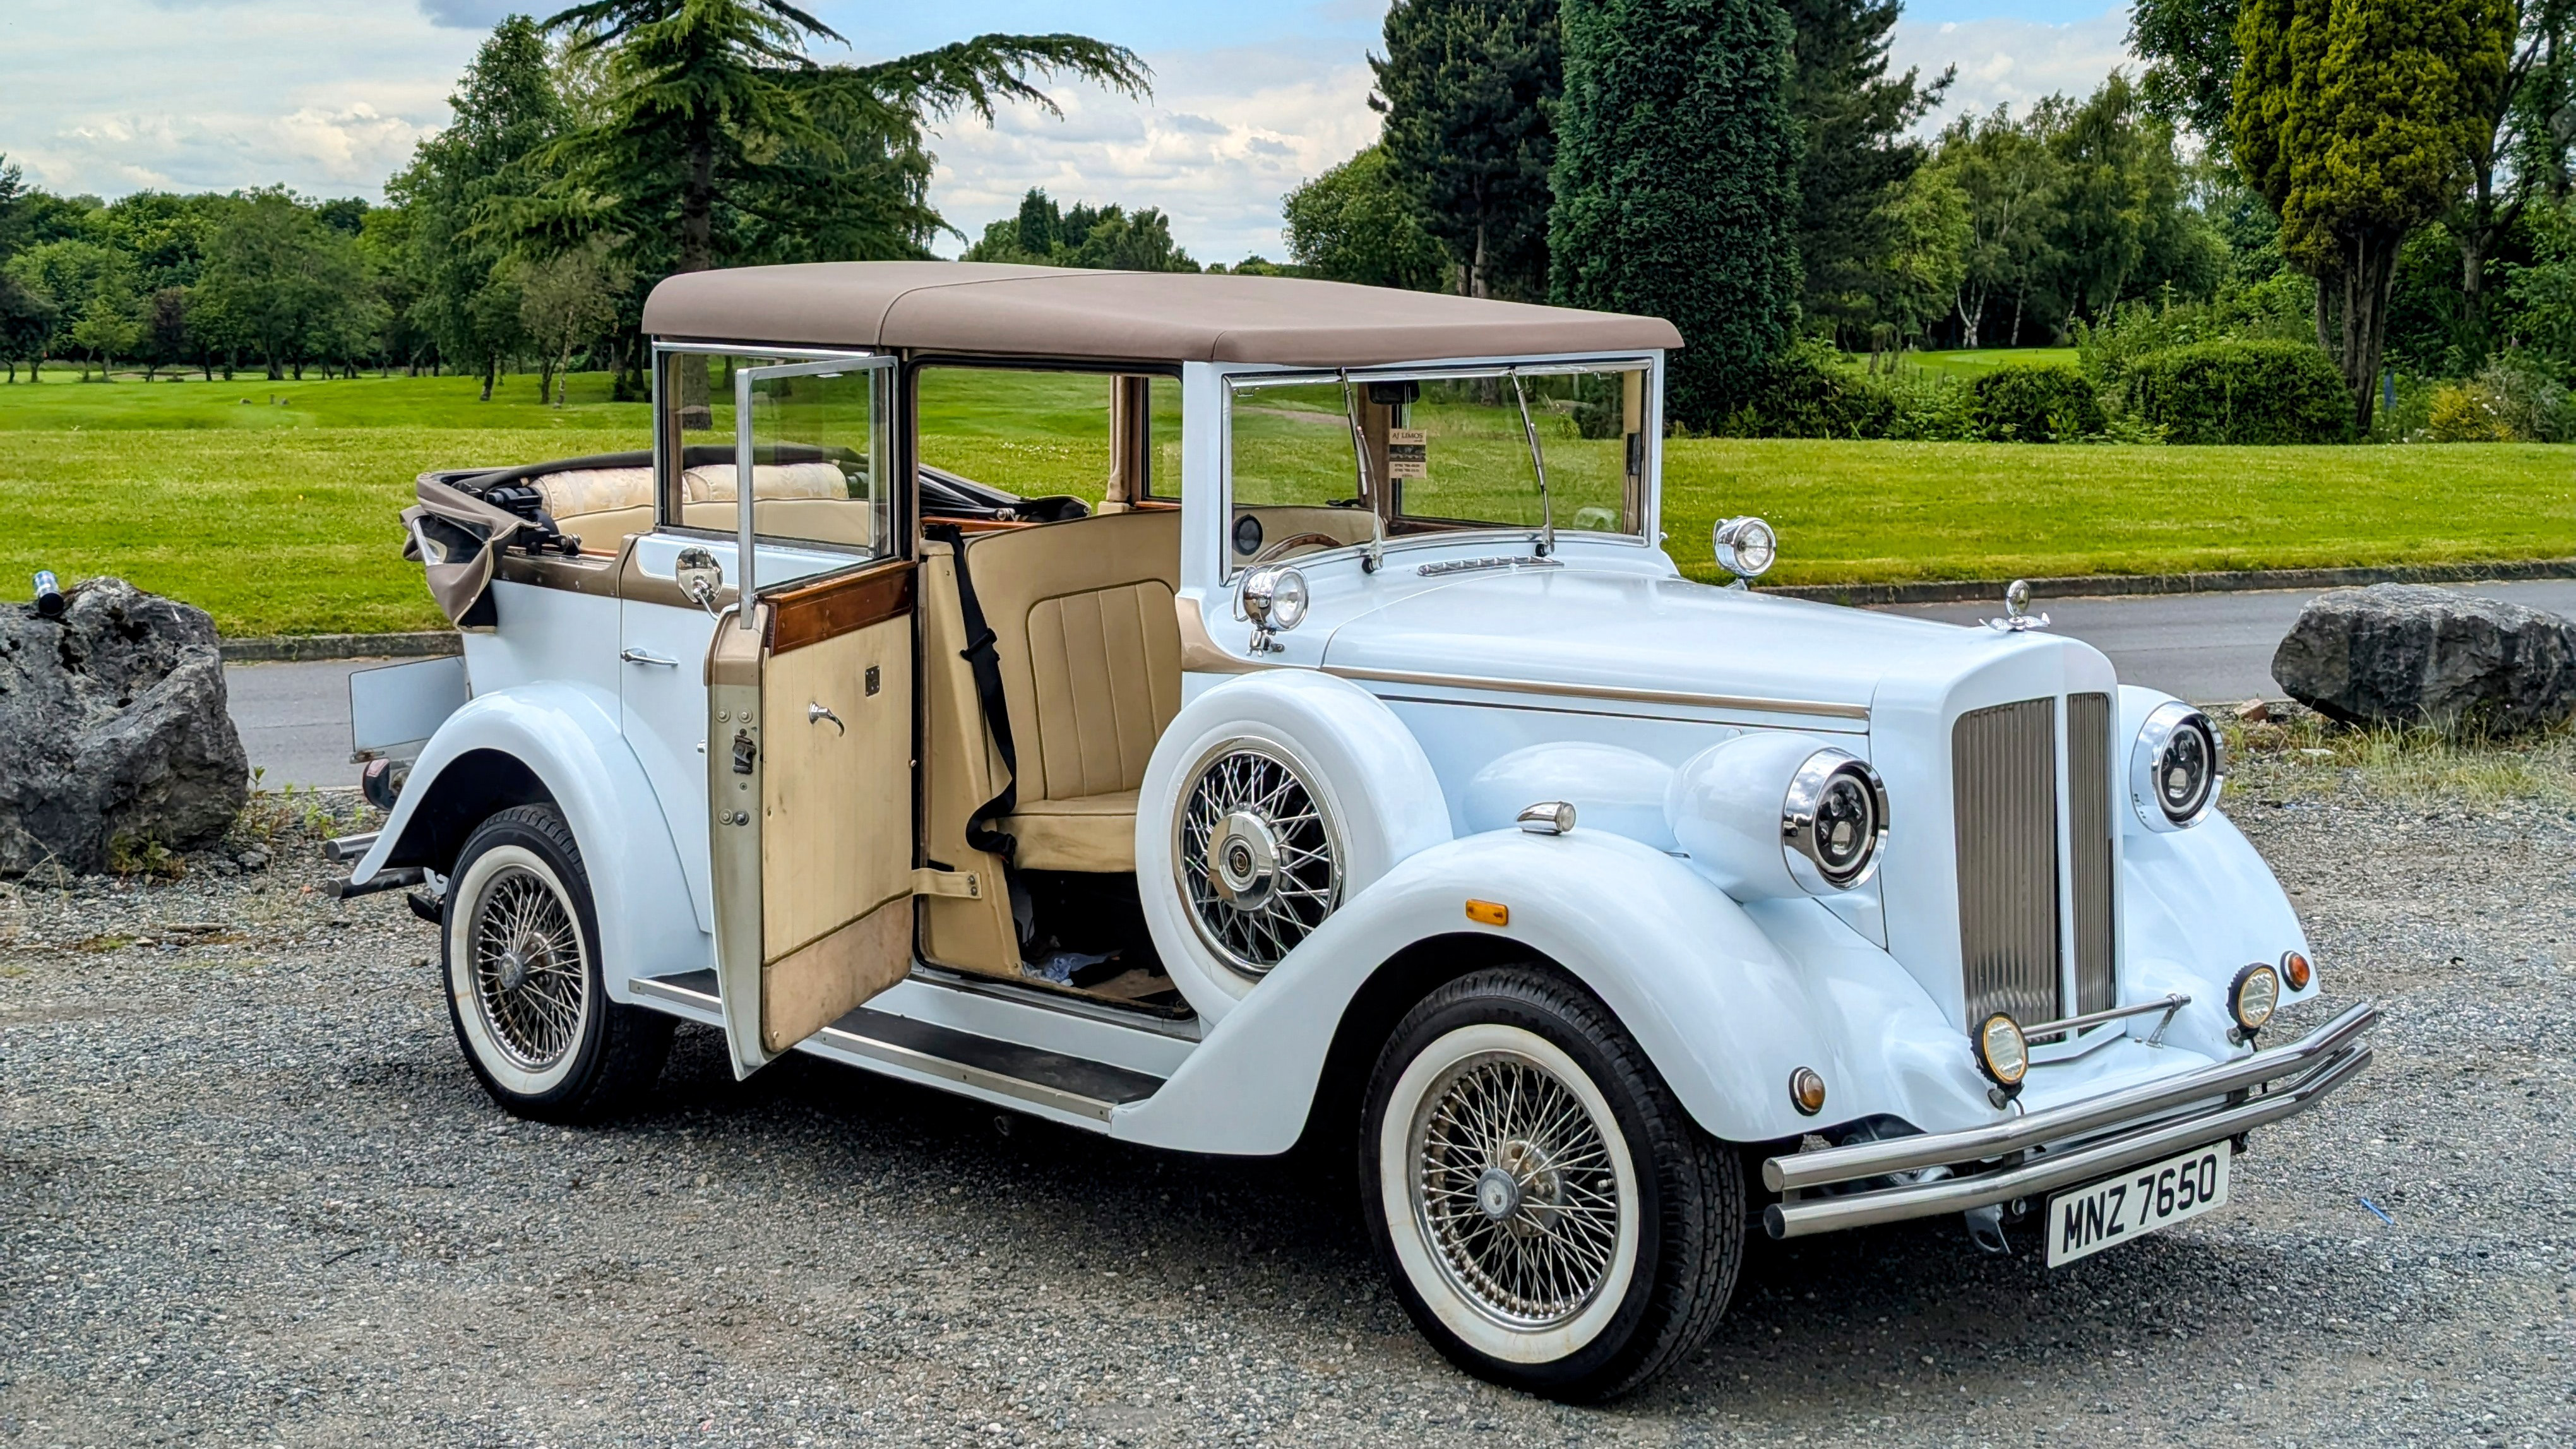 Convertible Regent Wedding Car in traditional white colour with rear Roof open